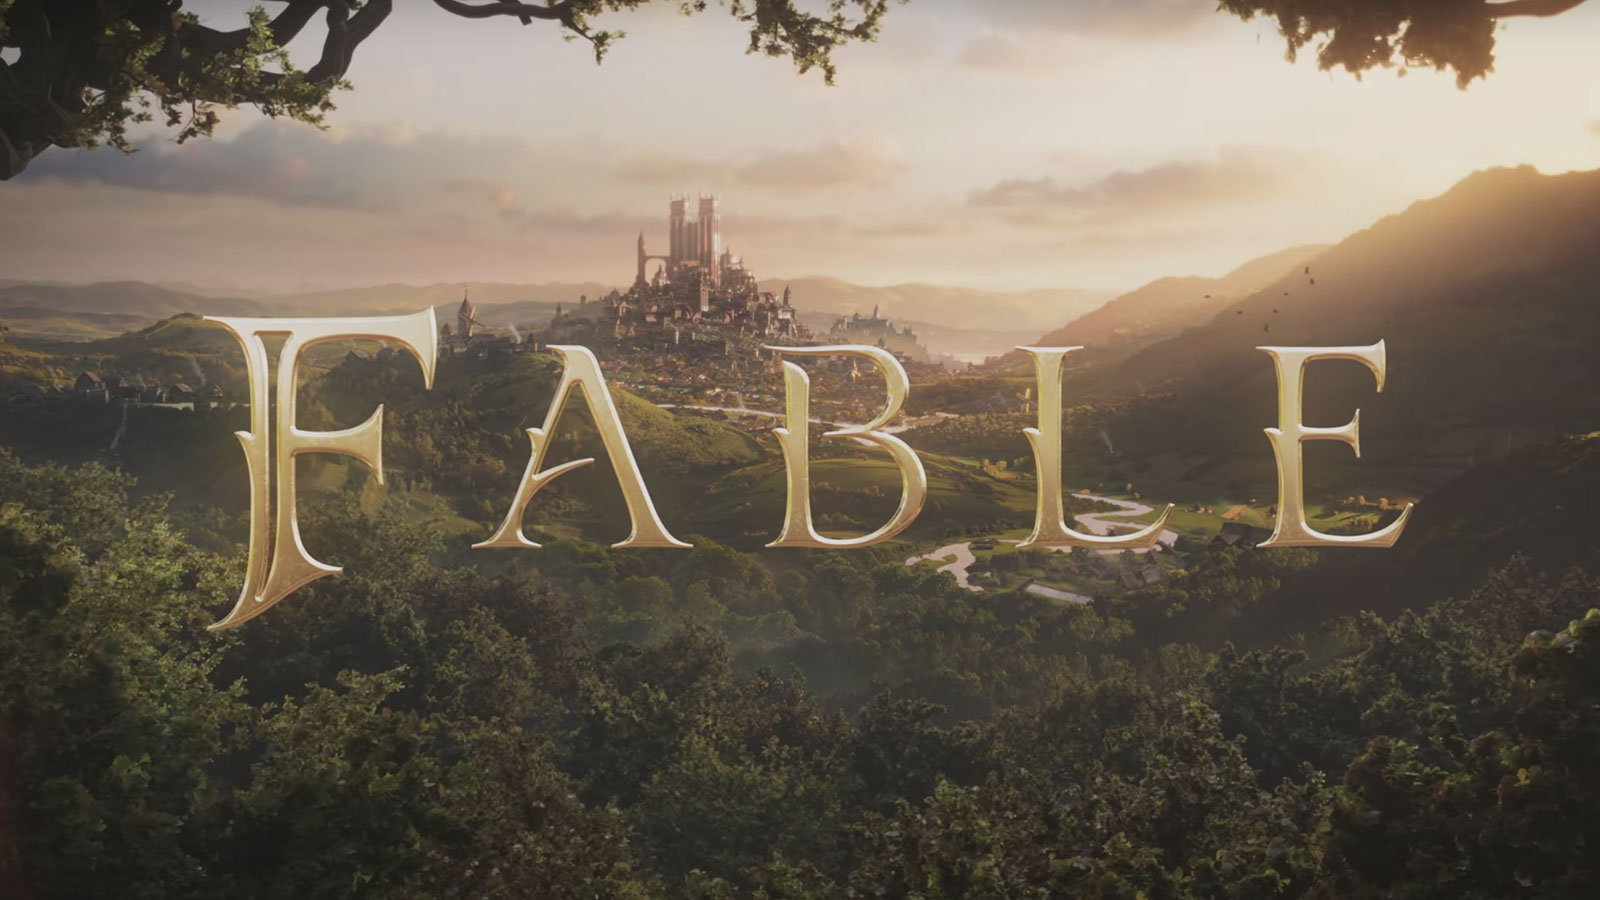 fable-announces-revival-of-the-fantasy-franchise-with-new-trailer-imboldn